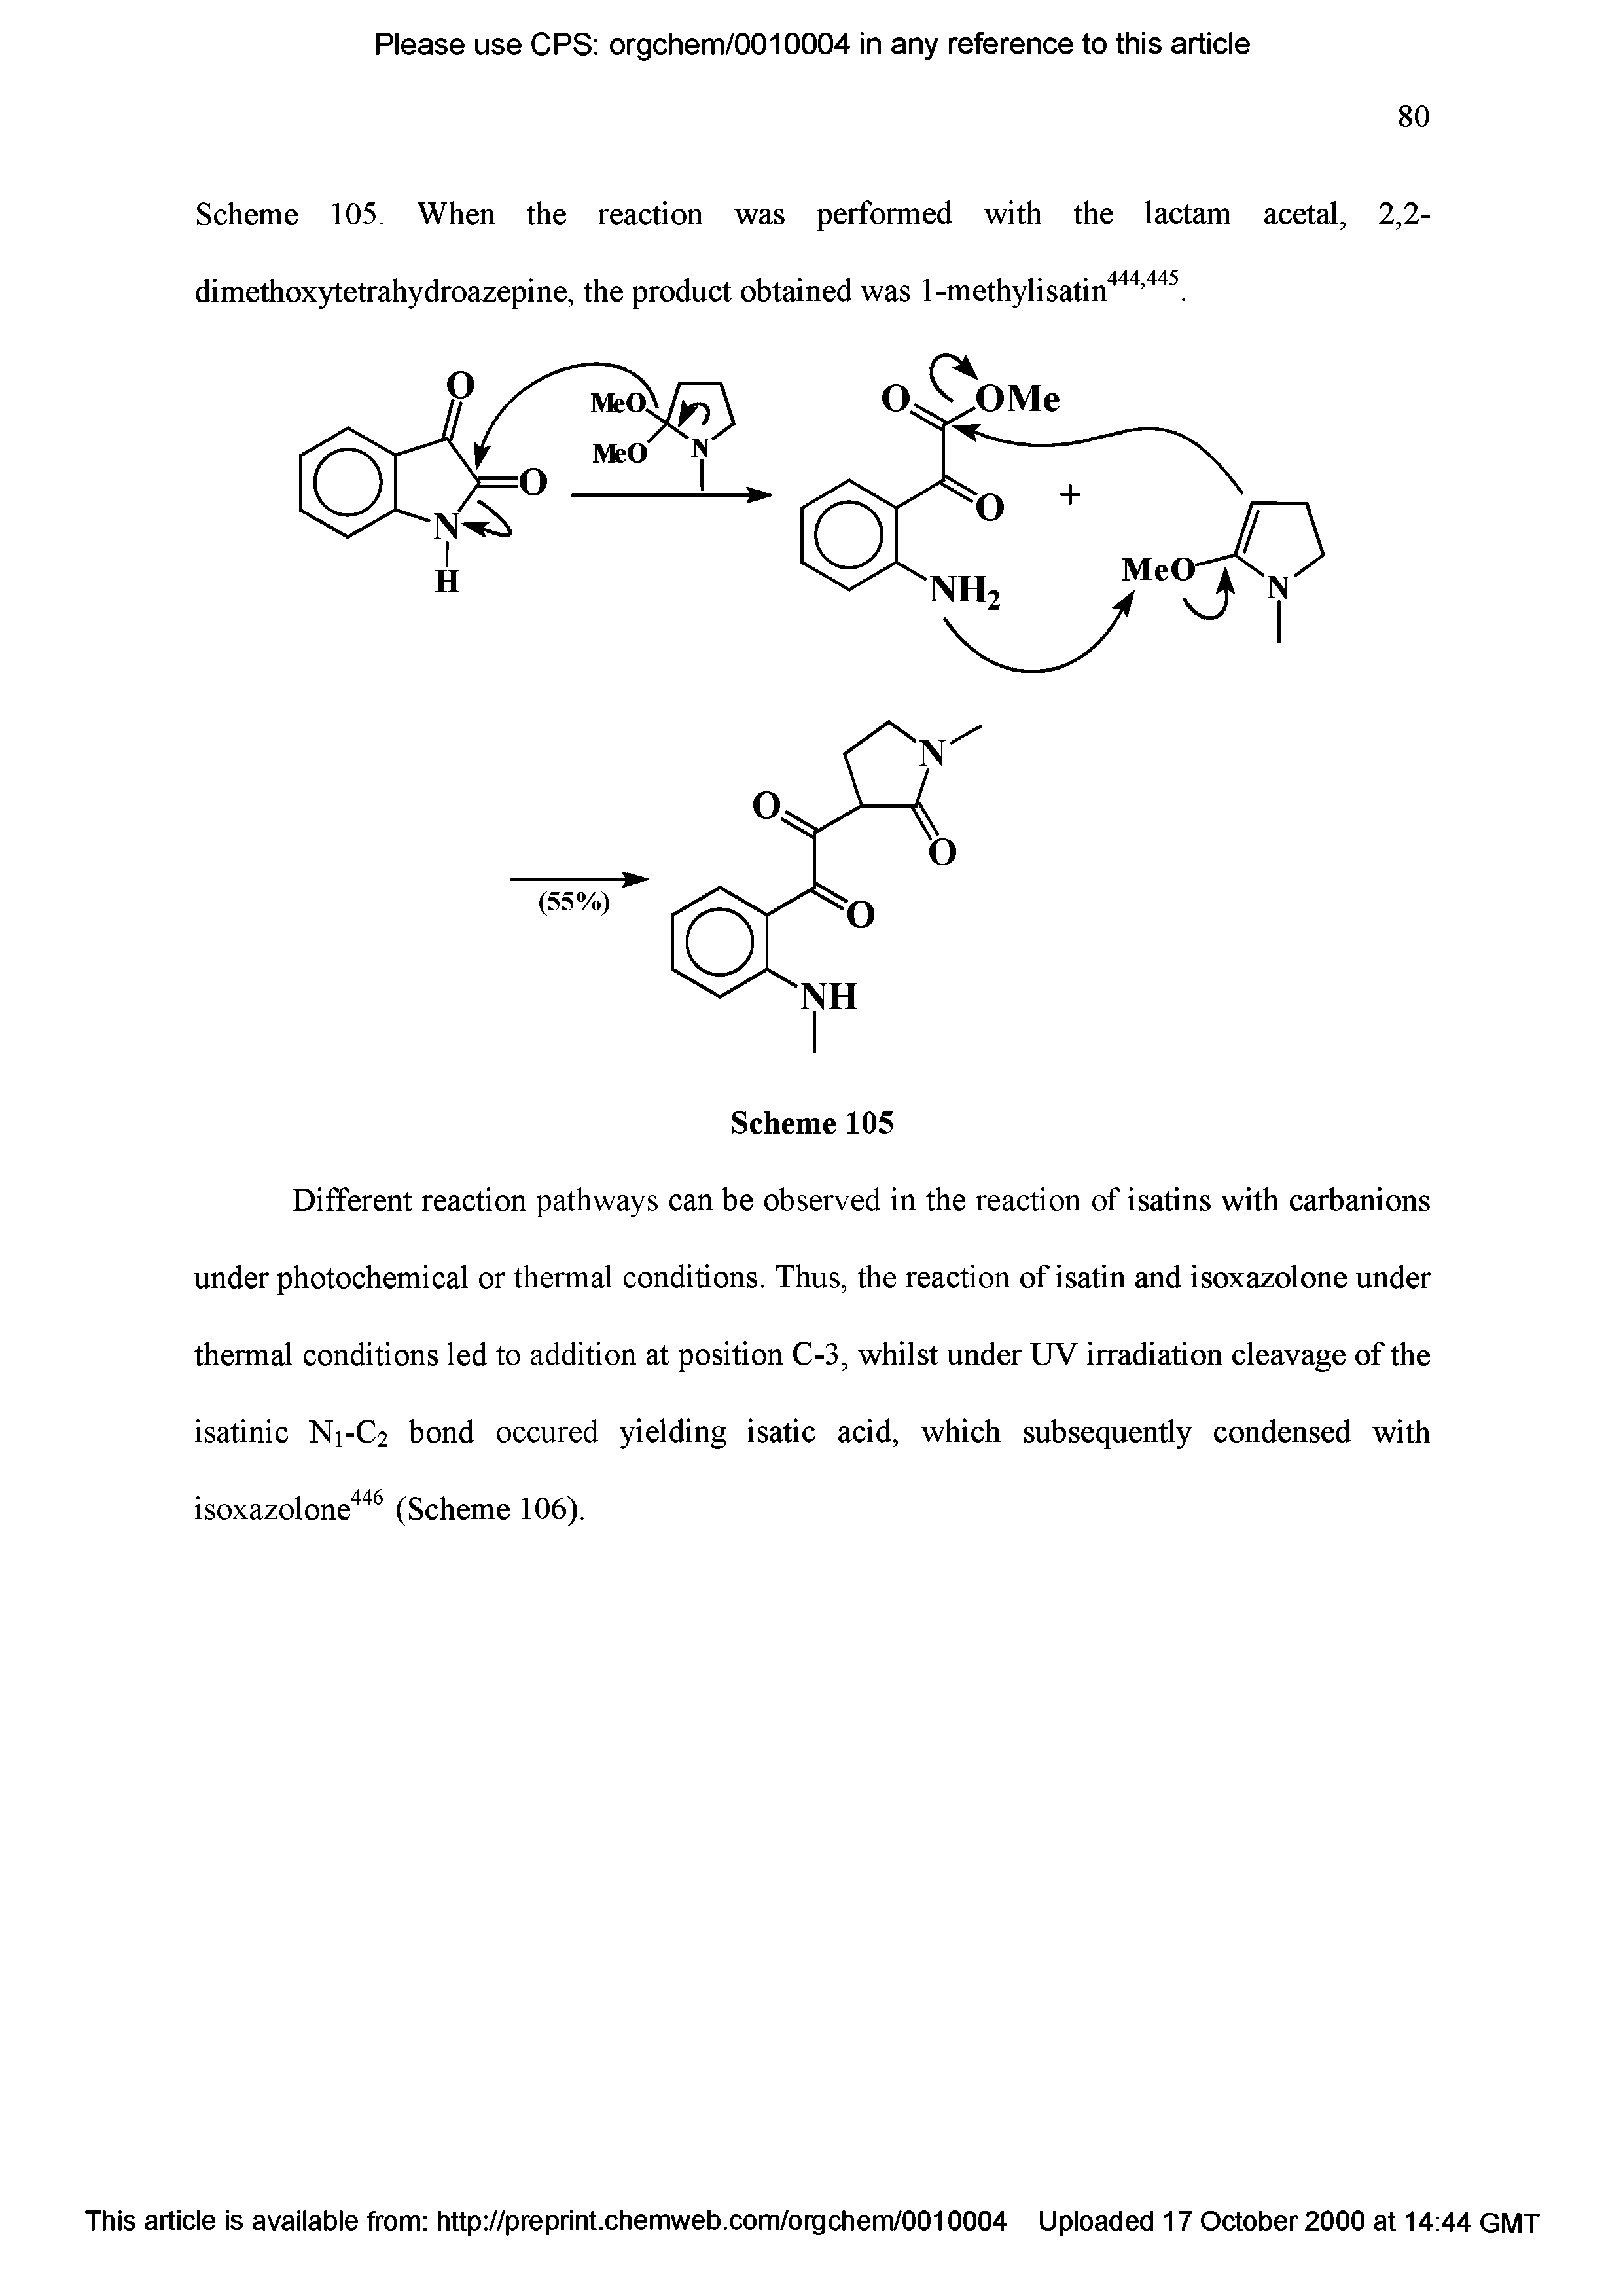 Scheme 105. When the reaction was performed with the lactam acetal, 2,2-dimethoxytetrahydroazepine, the product obtained was 1-methylisatin444,445.